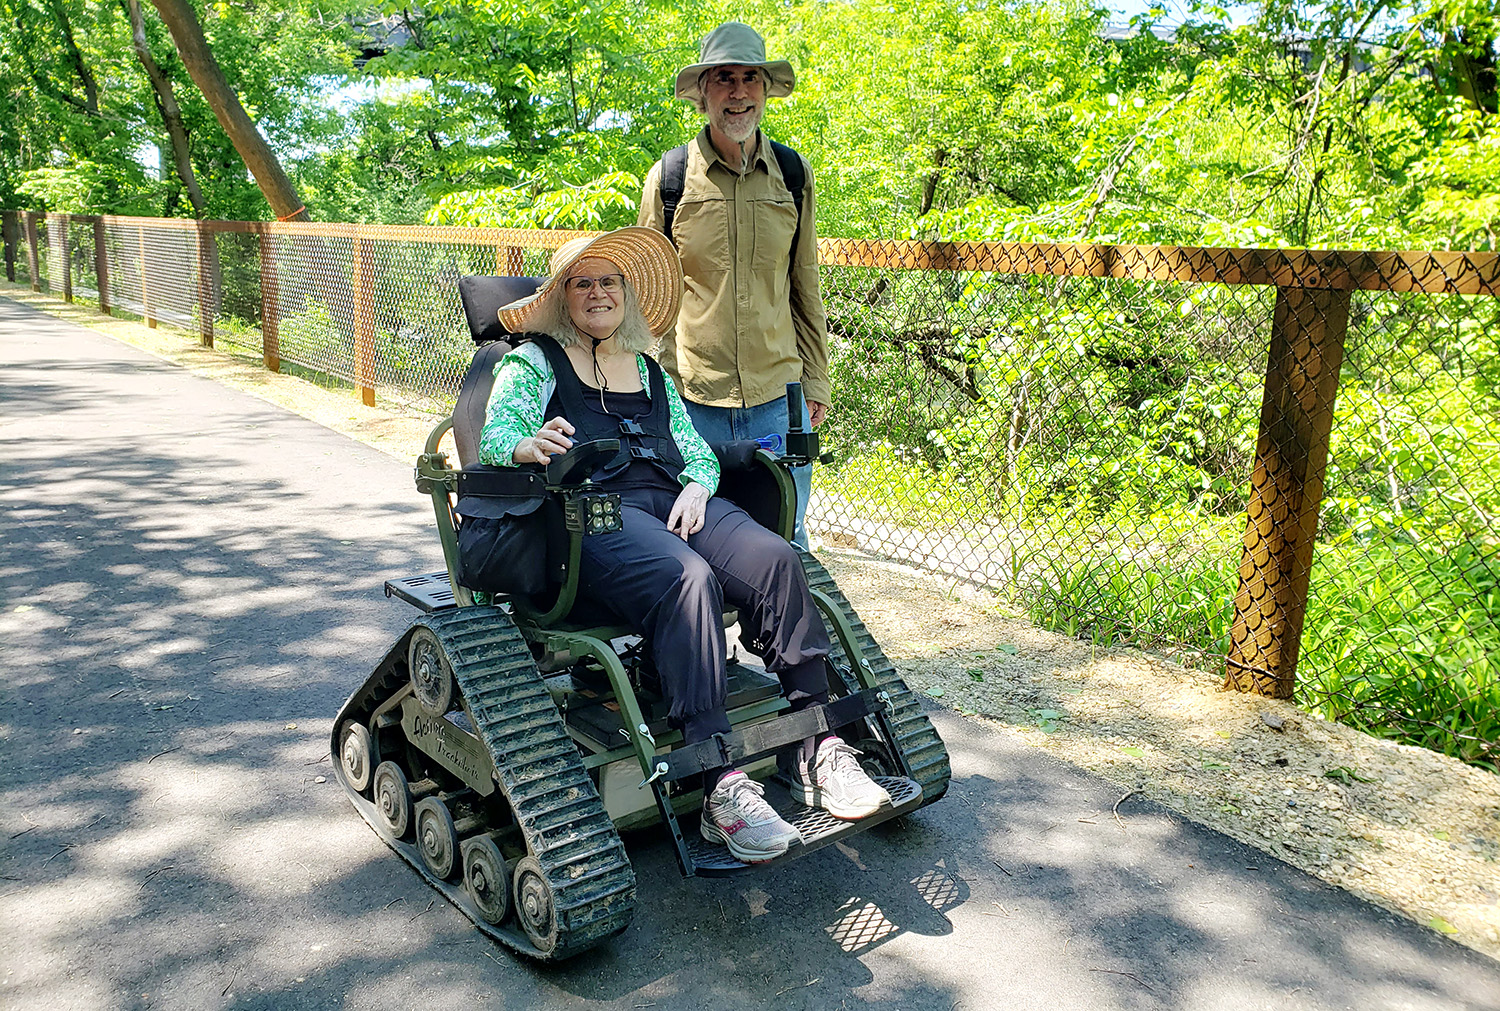 A woman in a motorized wheelchair designed with tank-like tracks is smiling, wearing a wide-brimmed straw hat, a green top, and black pants. Standing beside her is a man in a wide-brimmed hat, khaki shirt, and dark pants. They are outdoors on a sunny day near a fenced path with greenery in the background.